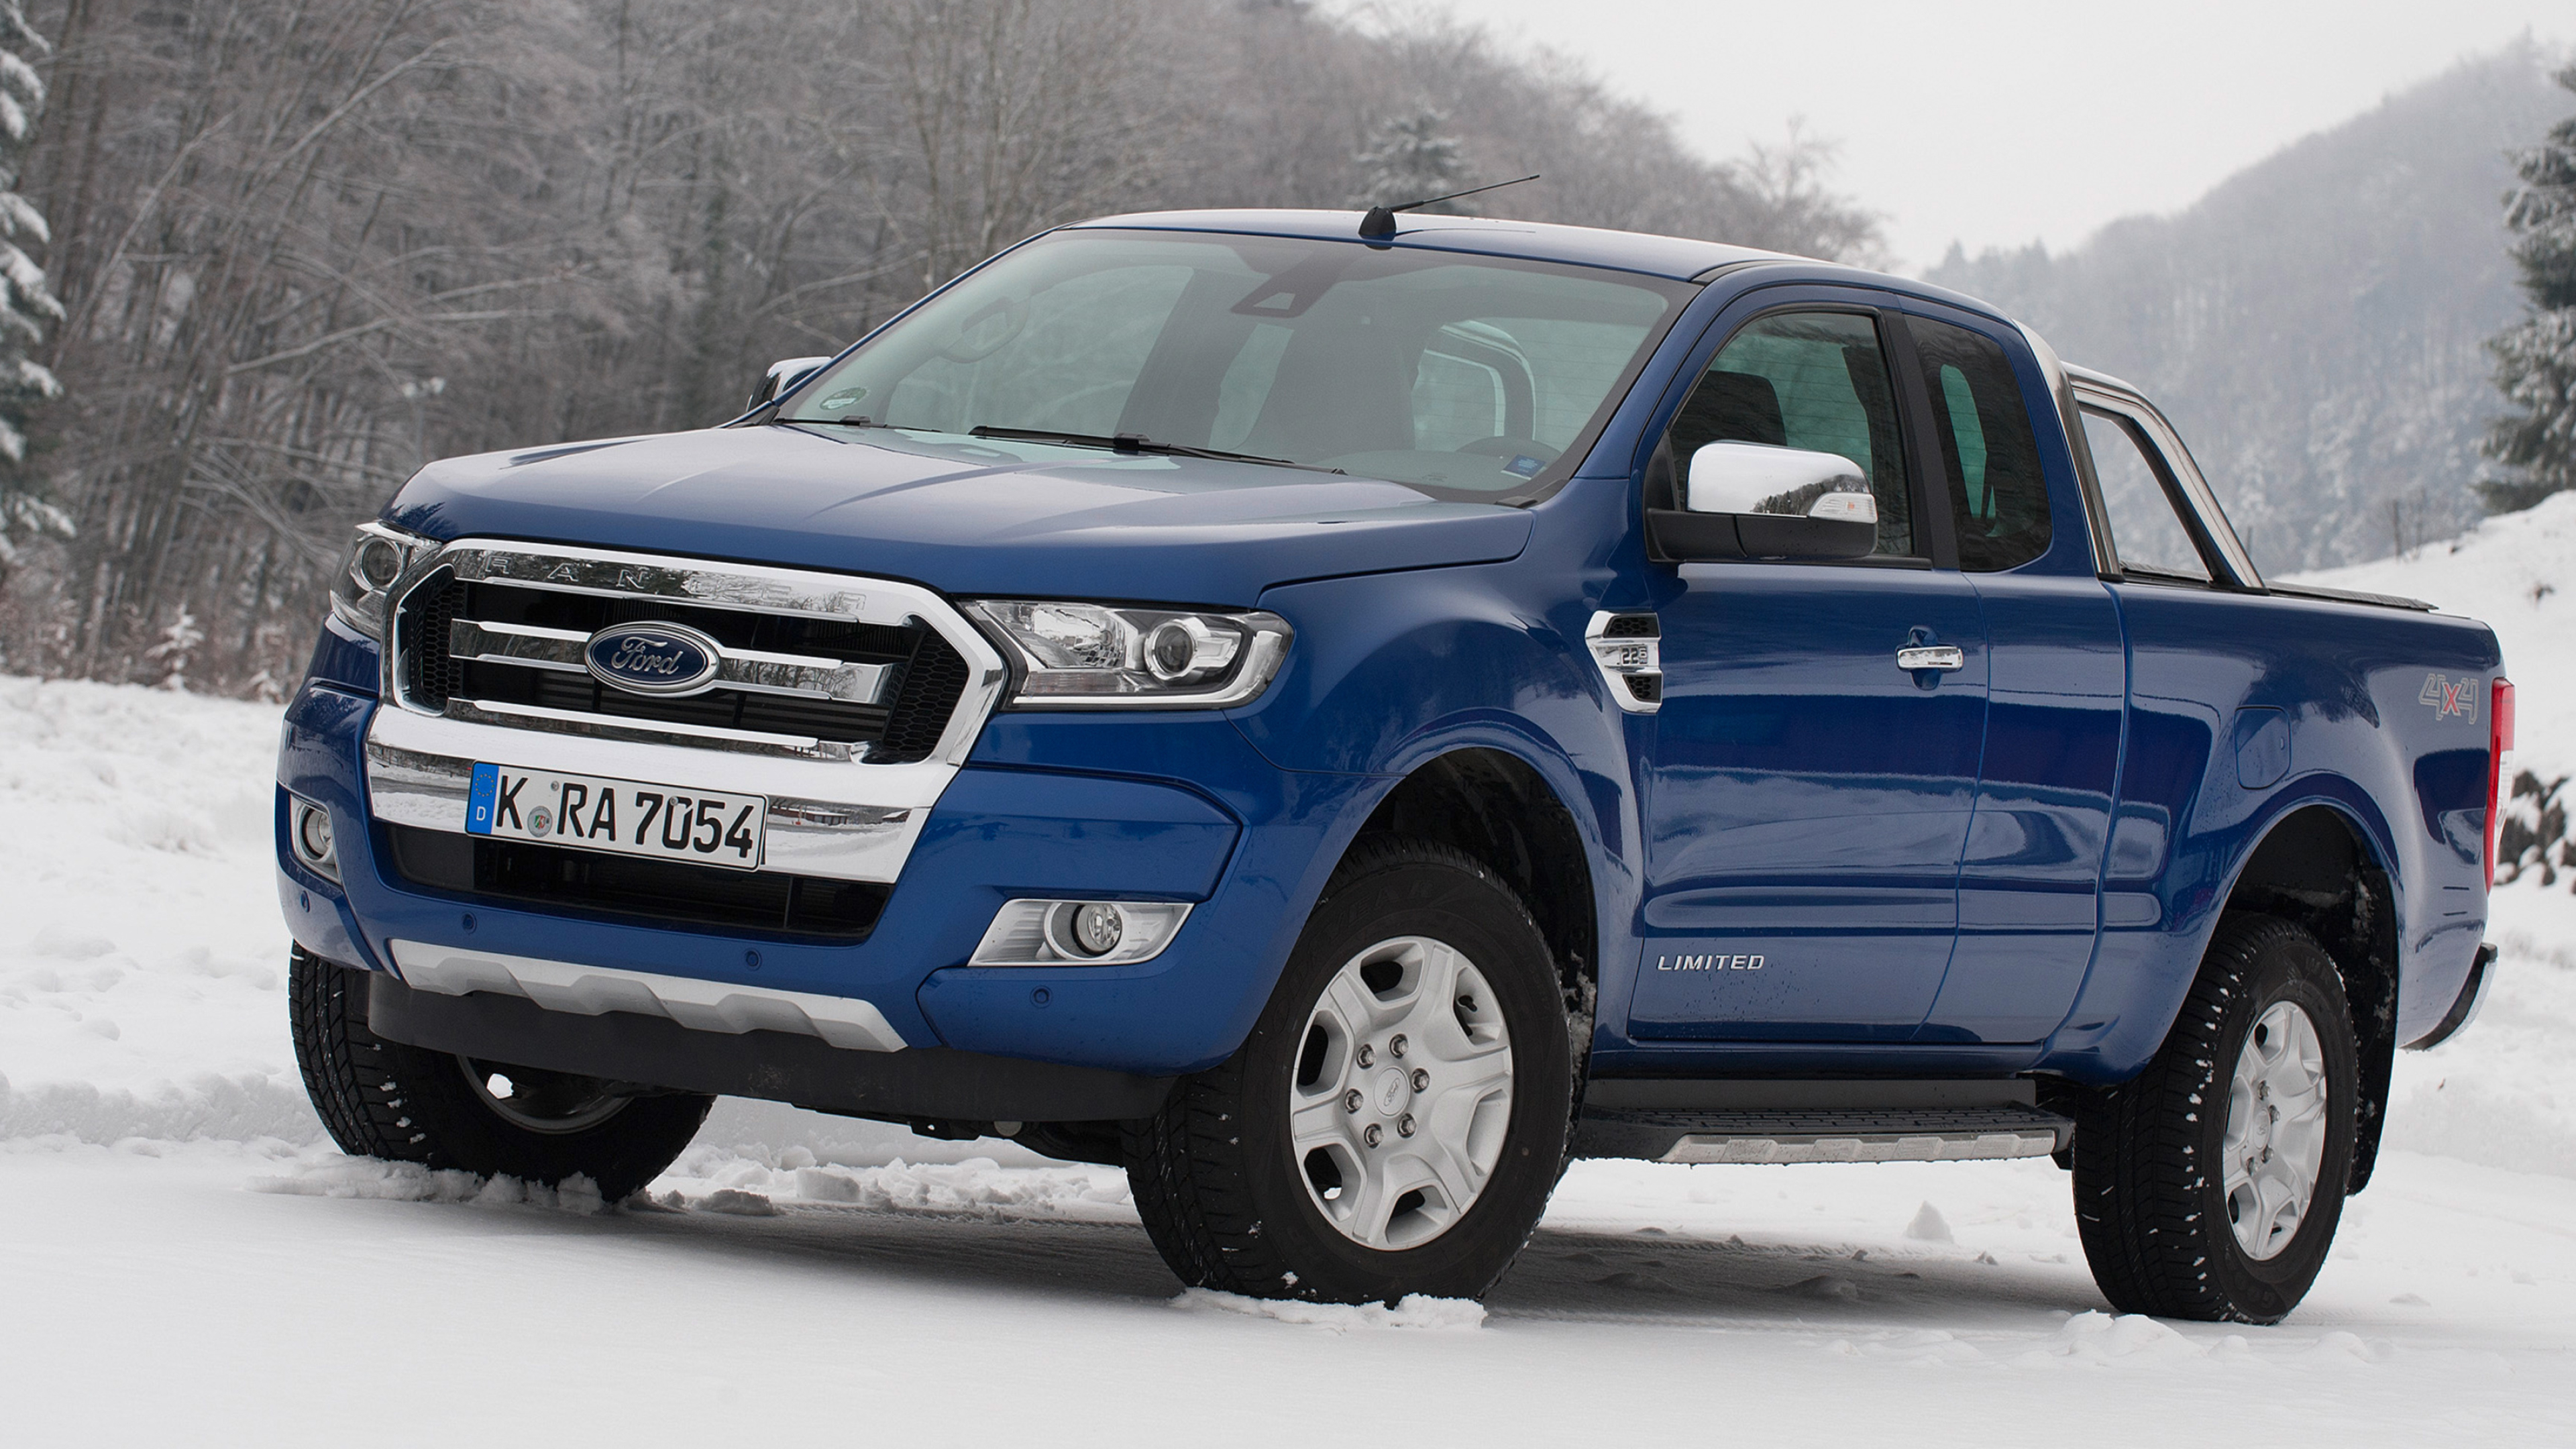 Ford Ranger: The car was reintroduced in North America in 2019 using the globally-marketed T6 model. 3840x2160 4K Background.